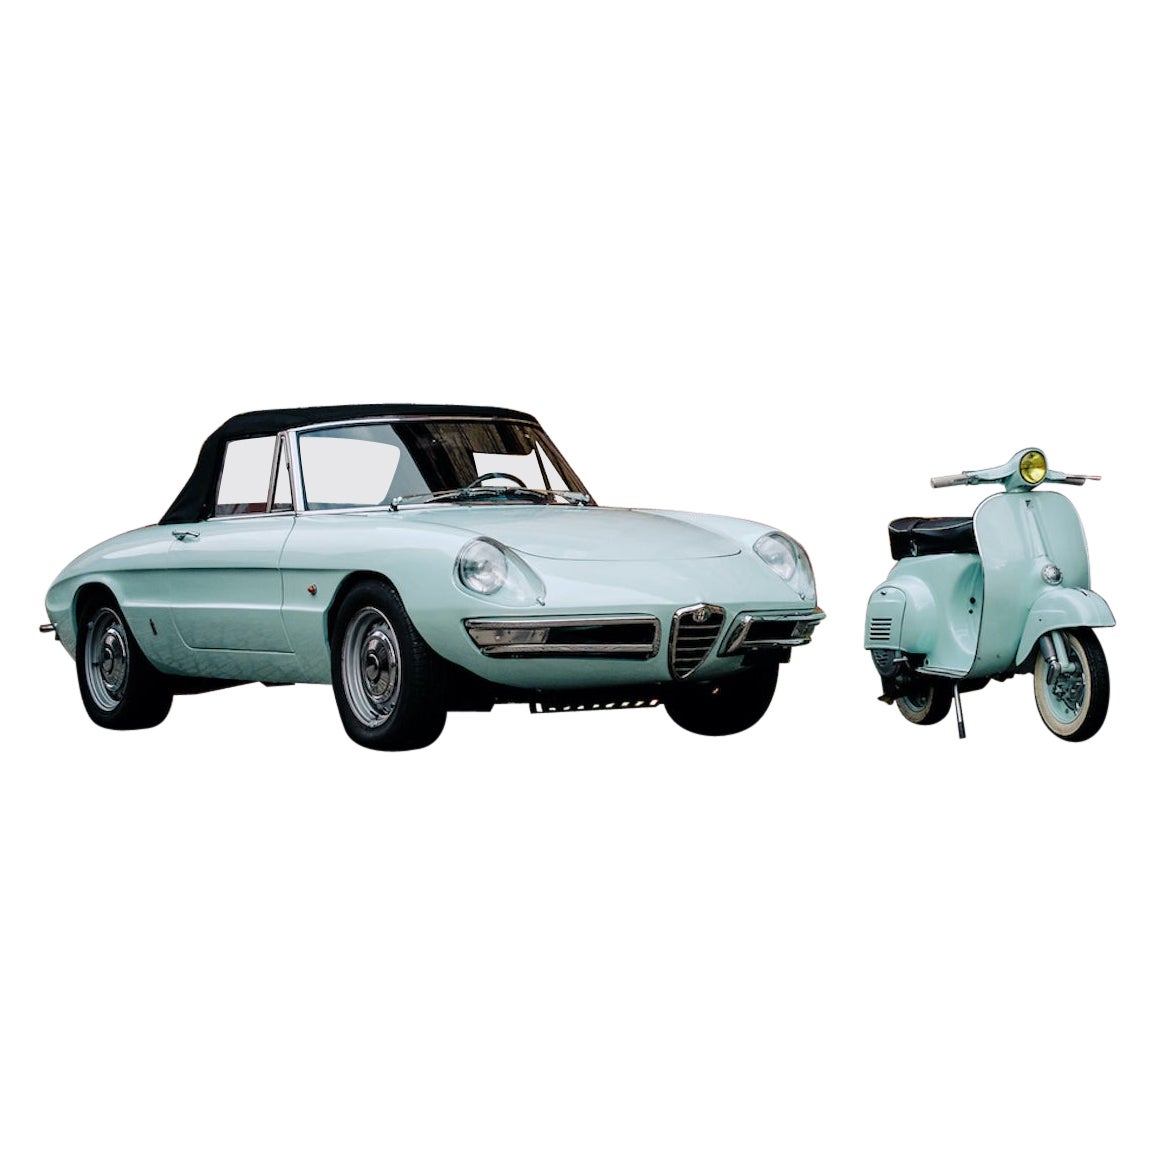 Rare 1967 Alfa Spider Duetto with matching Vespa, Italy